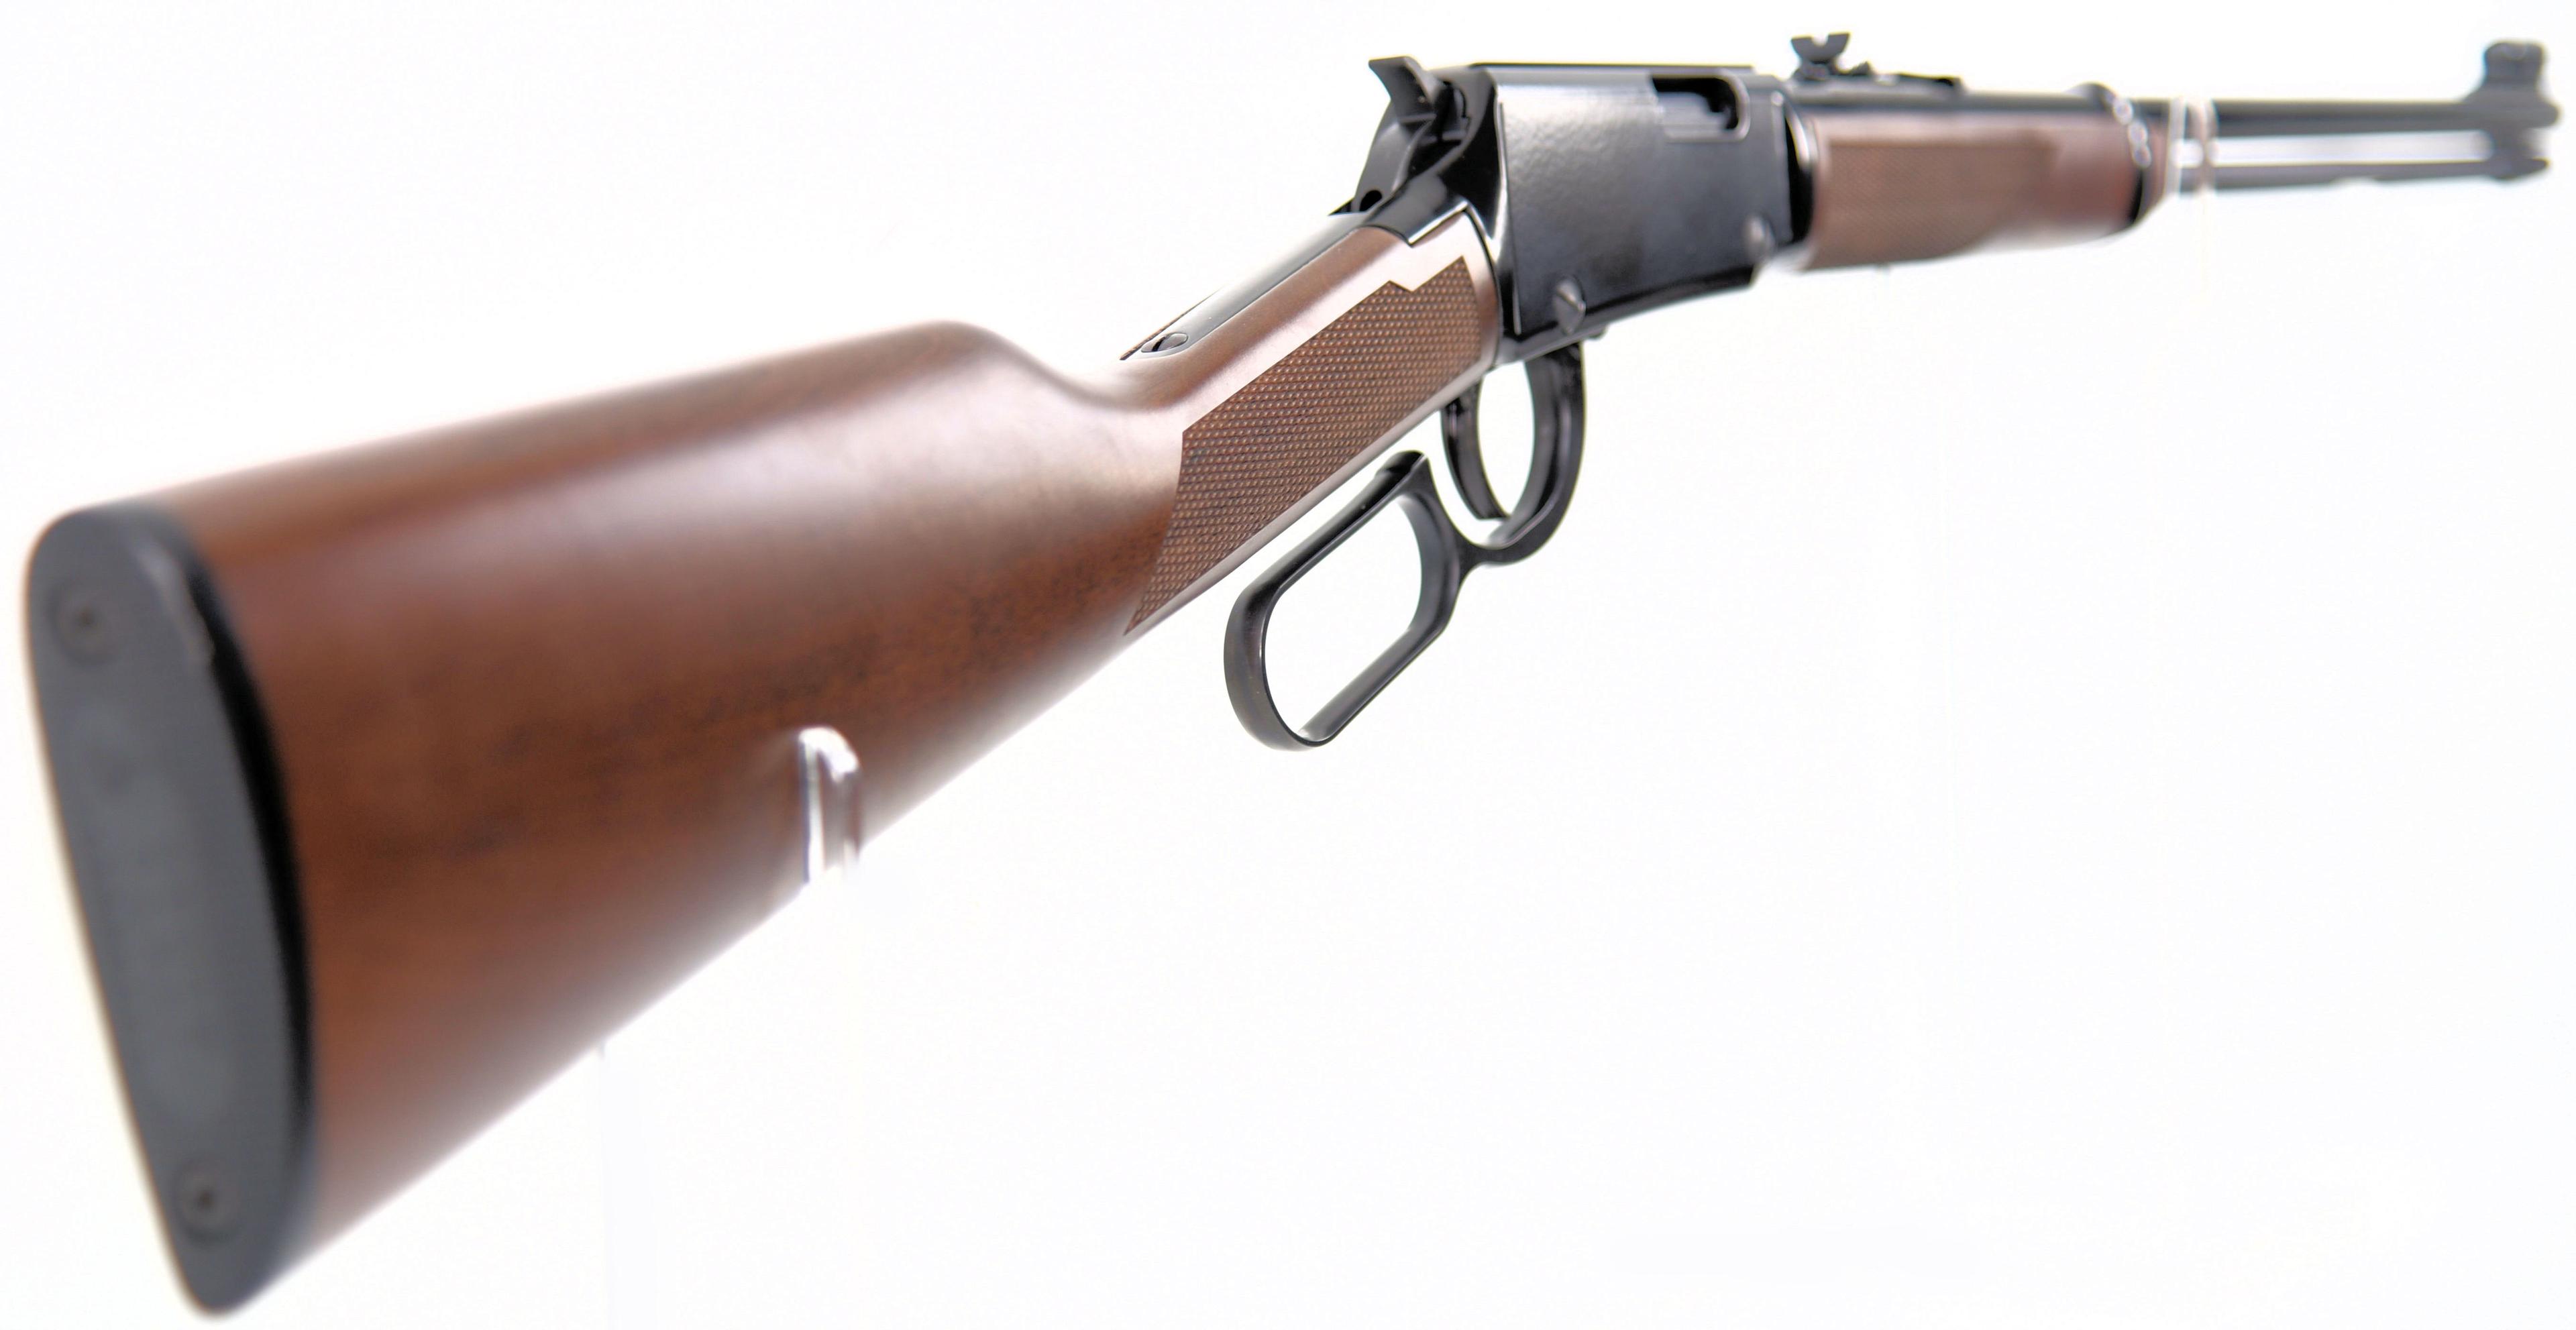 Henry Repeating Arms Co H001M Lever Action Rifle